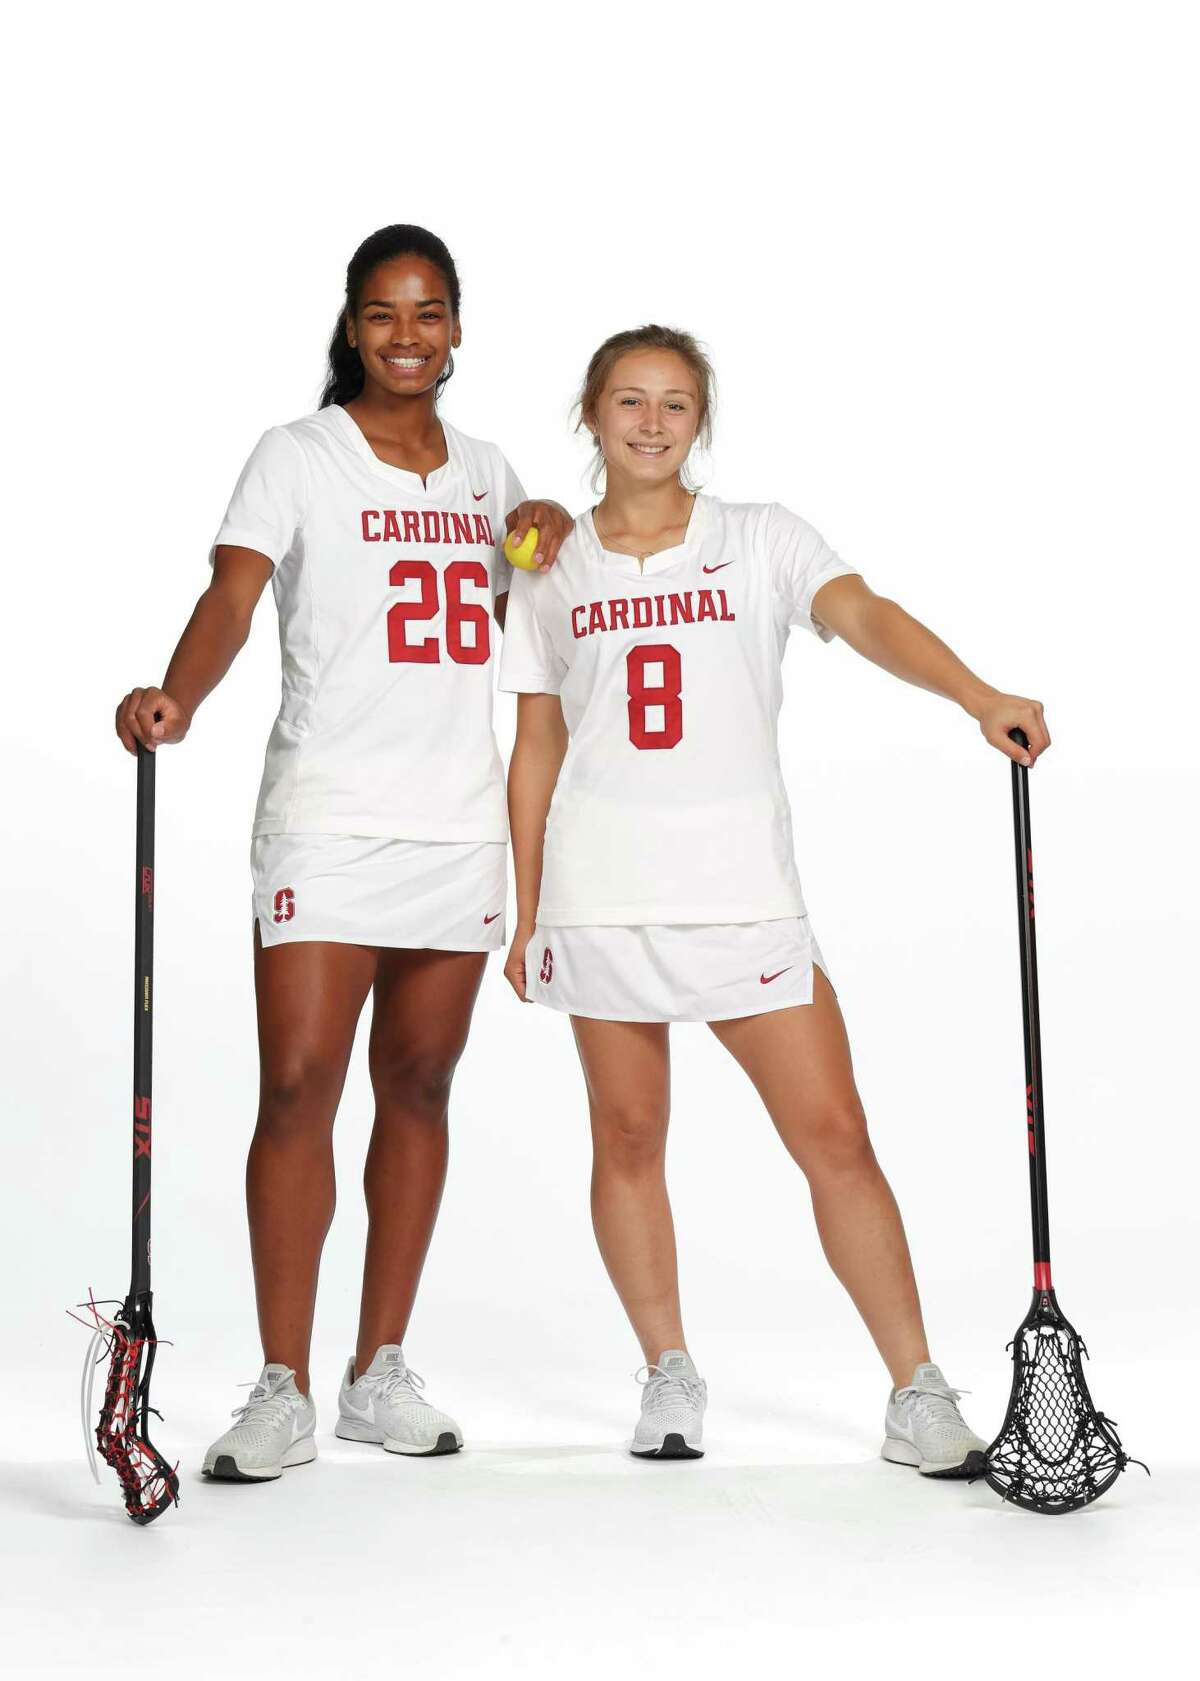 Mikaela Watson and Kyra Pelton during Stanford’s 2018 Women's Lacrosse Photo Day.